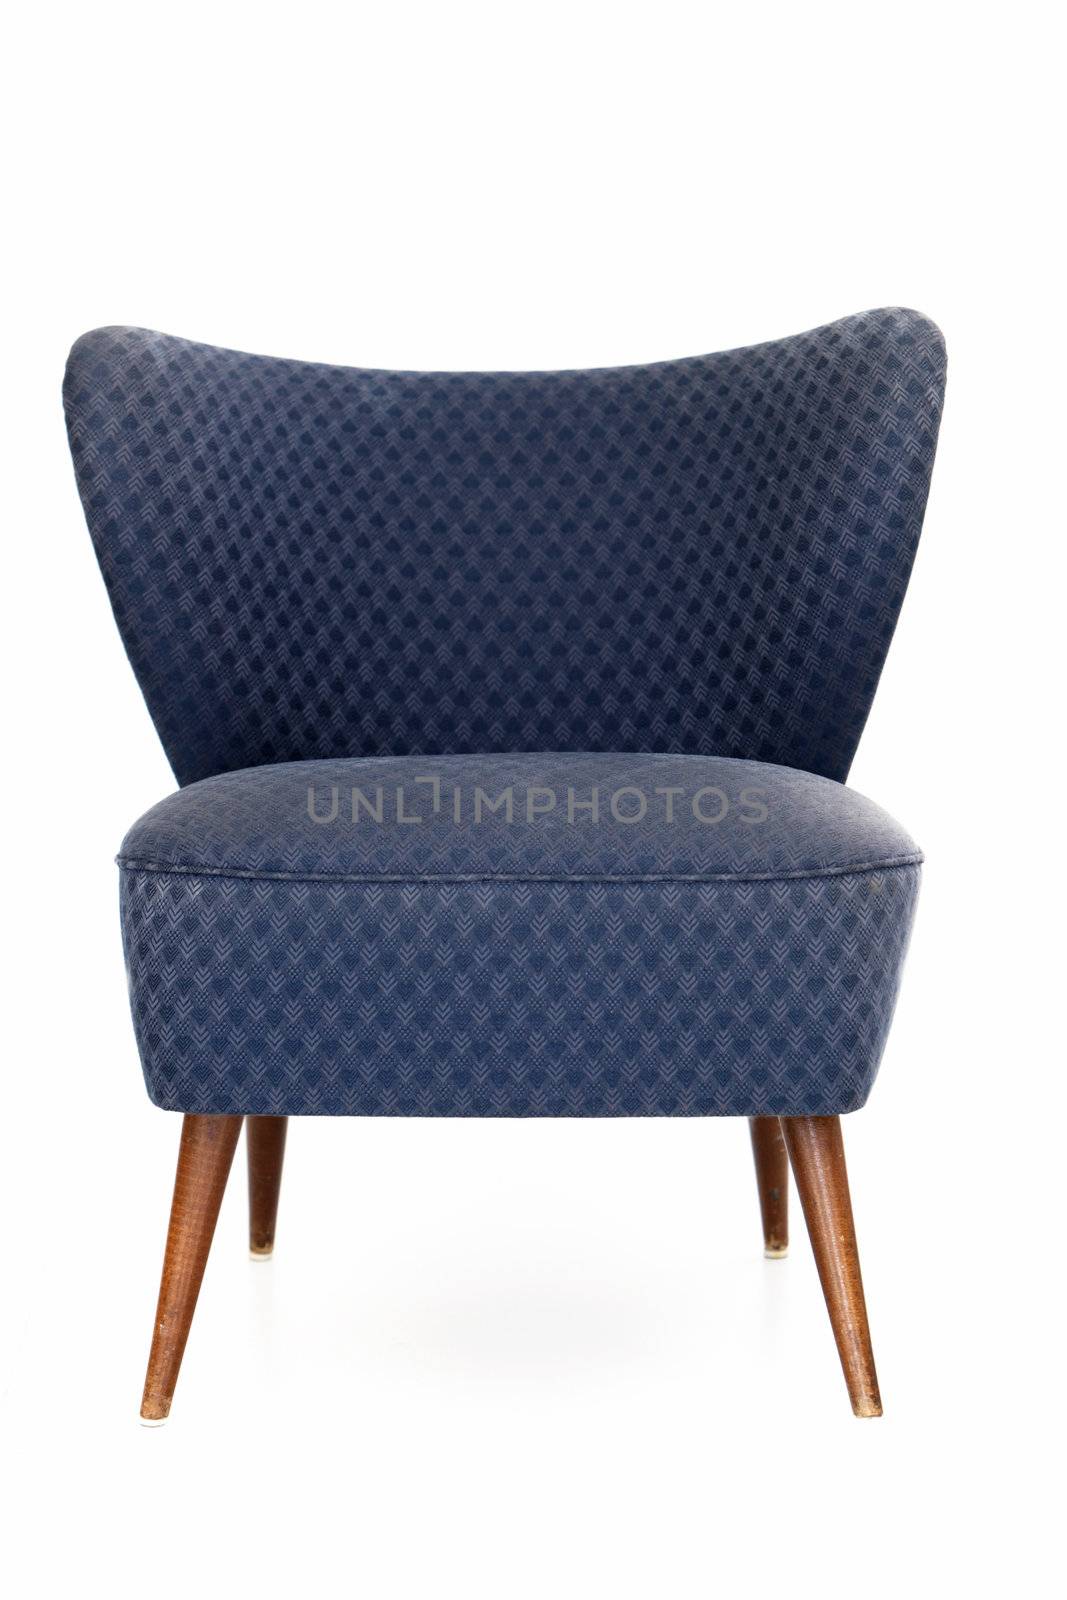 Retro blue upholstered chair by Farina6000